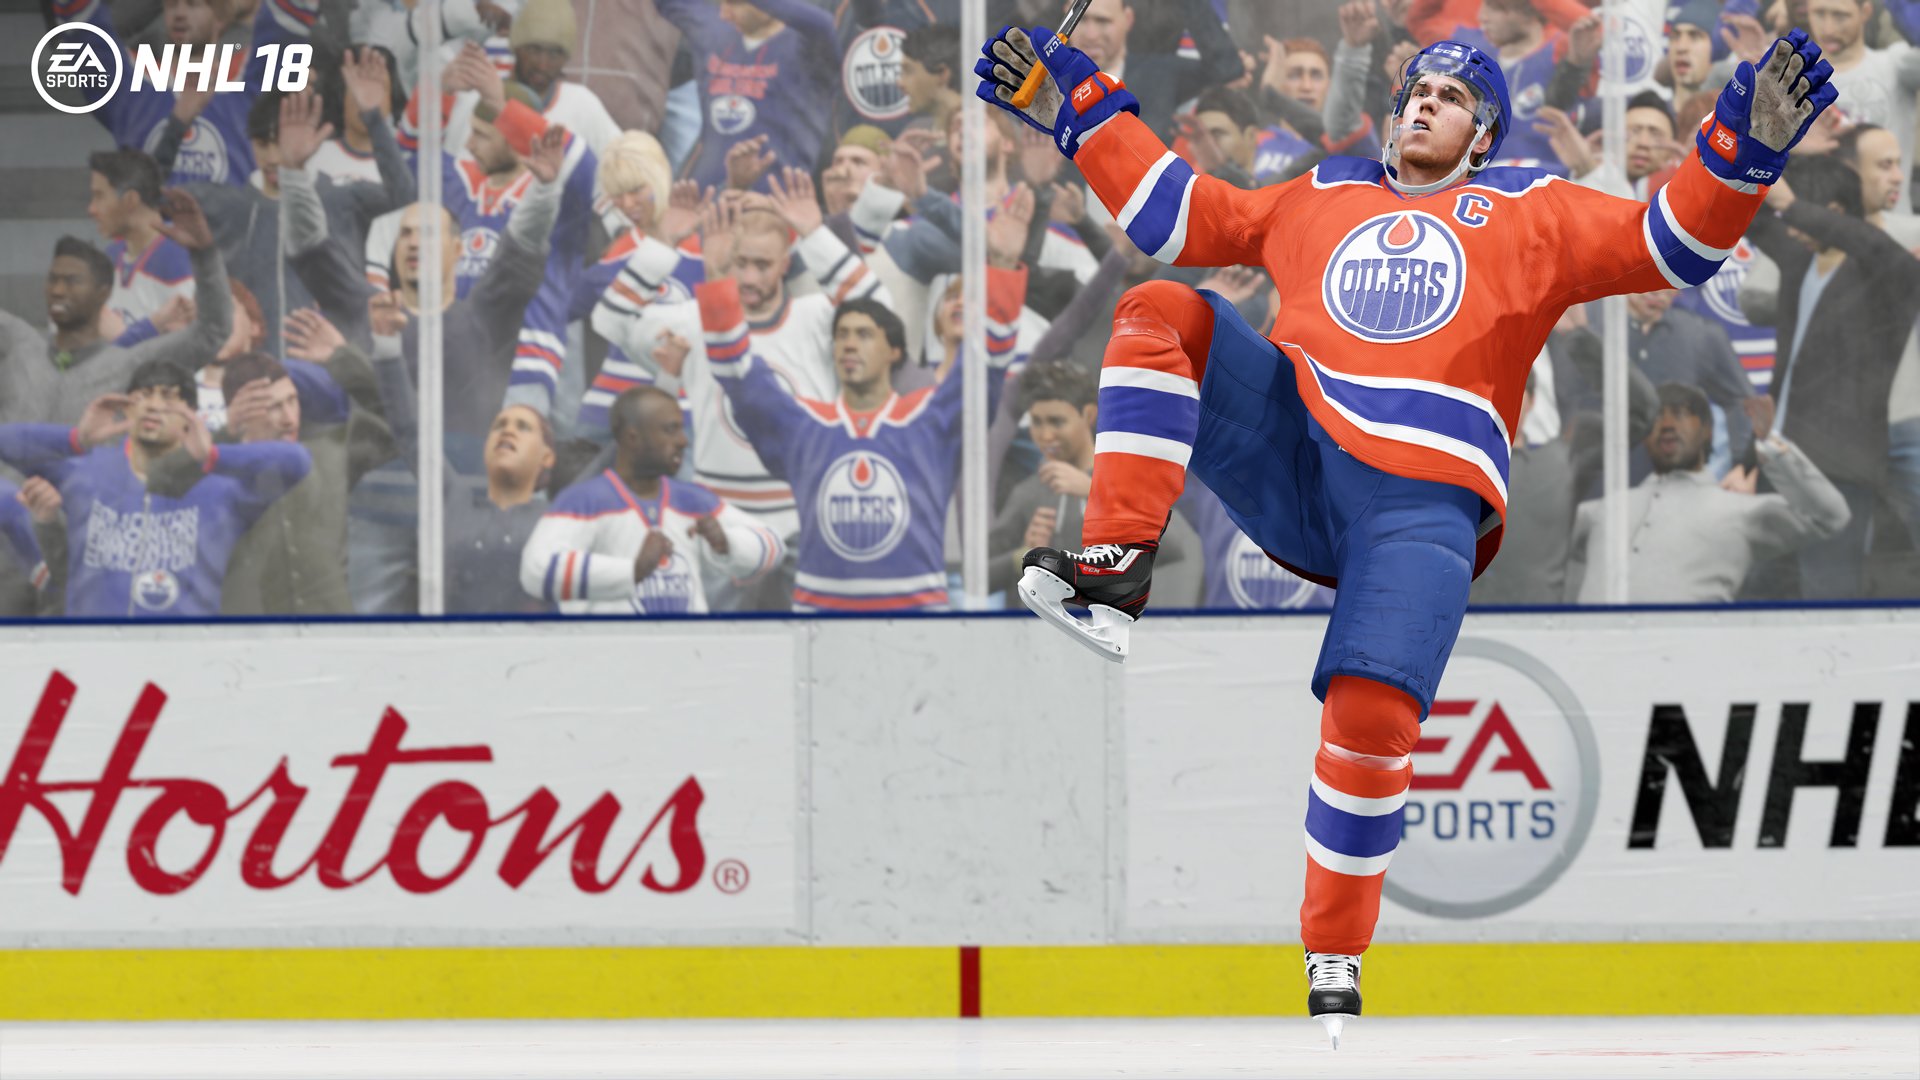 NHL 18 8900 Ultimate Points 1